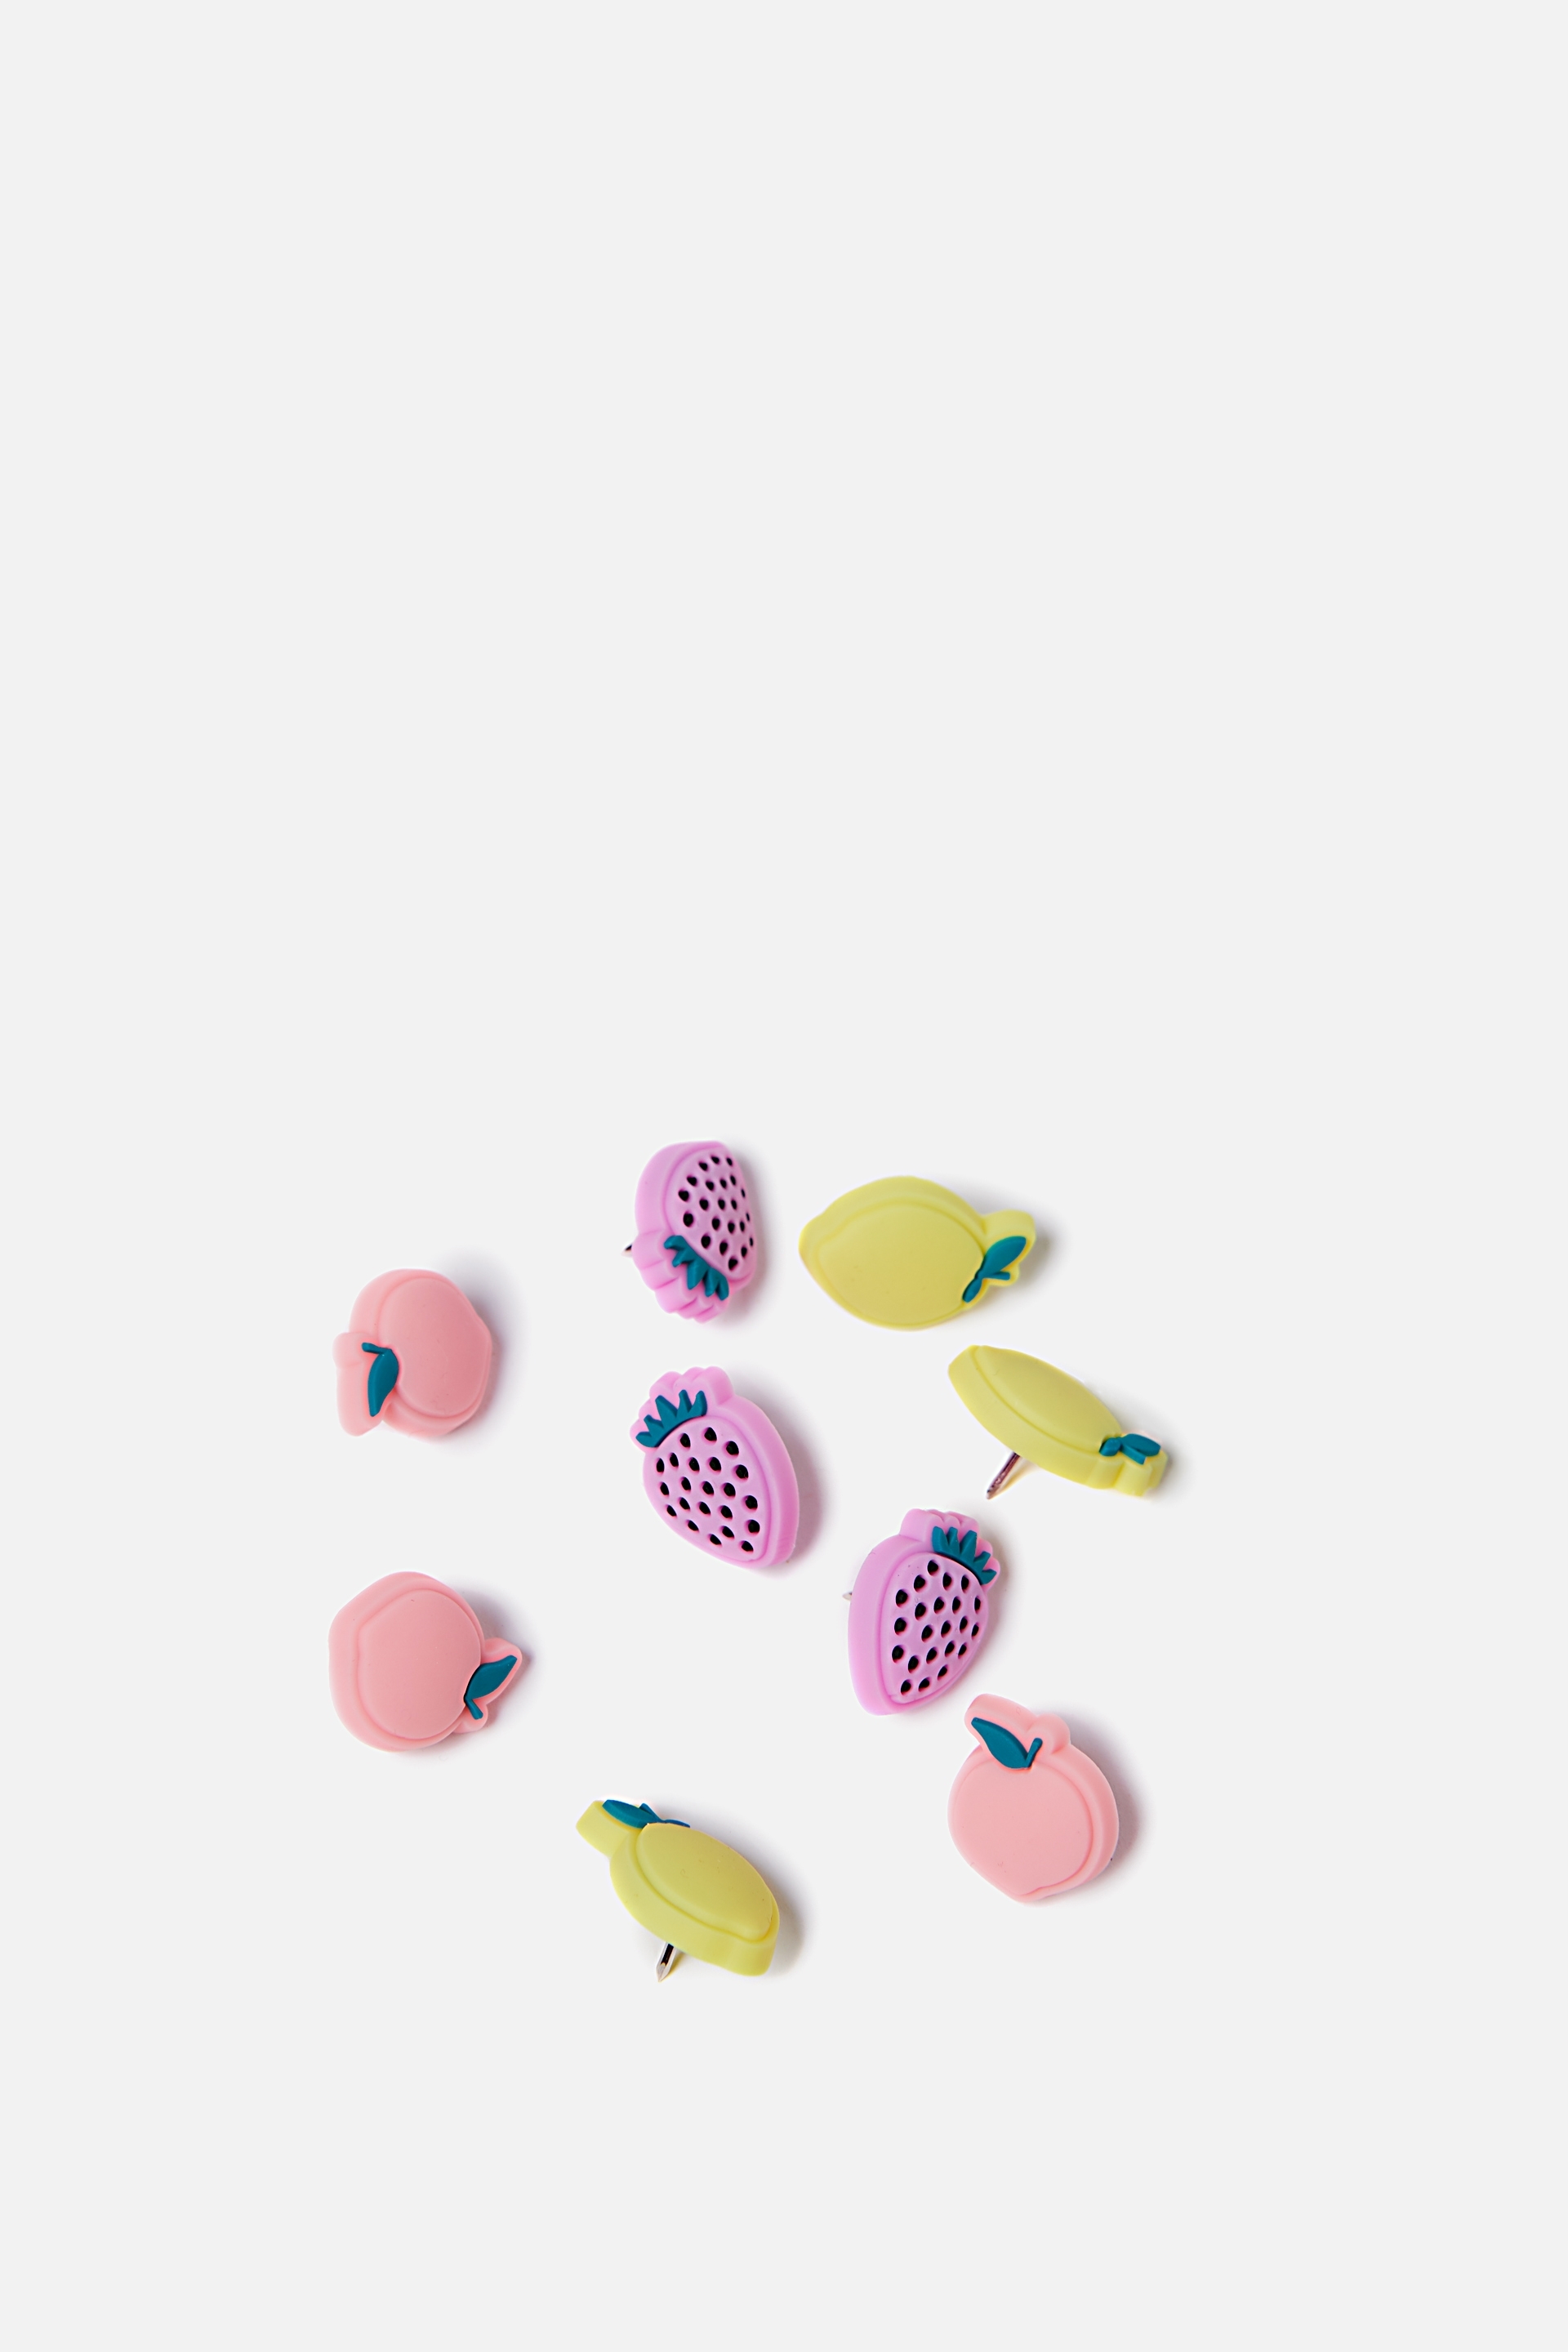 Fruit push pins from Typo